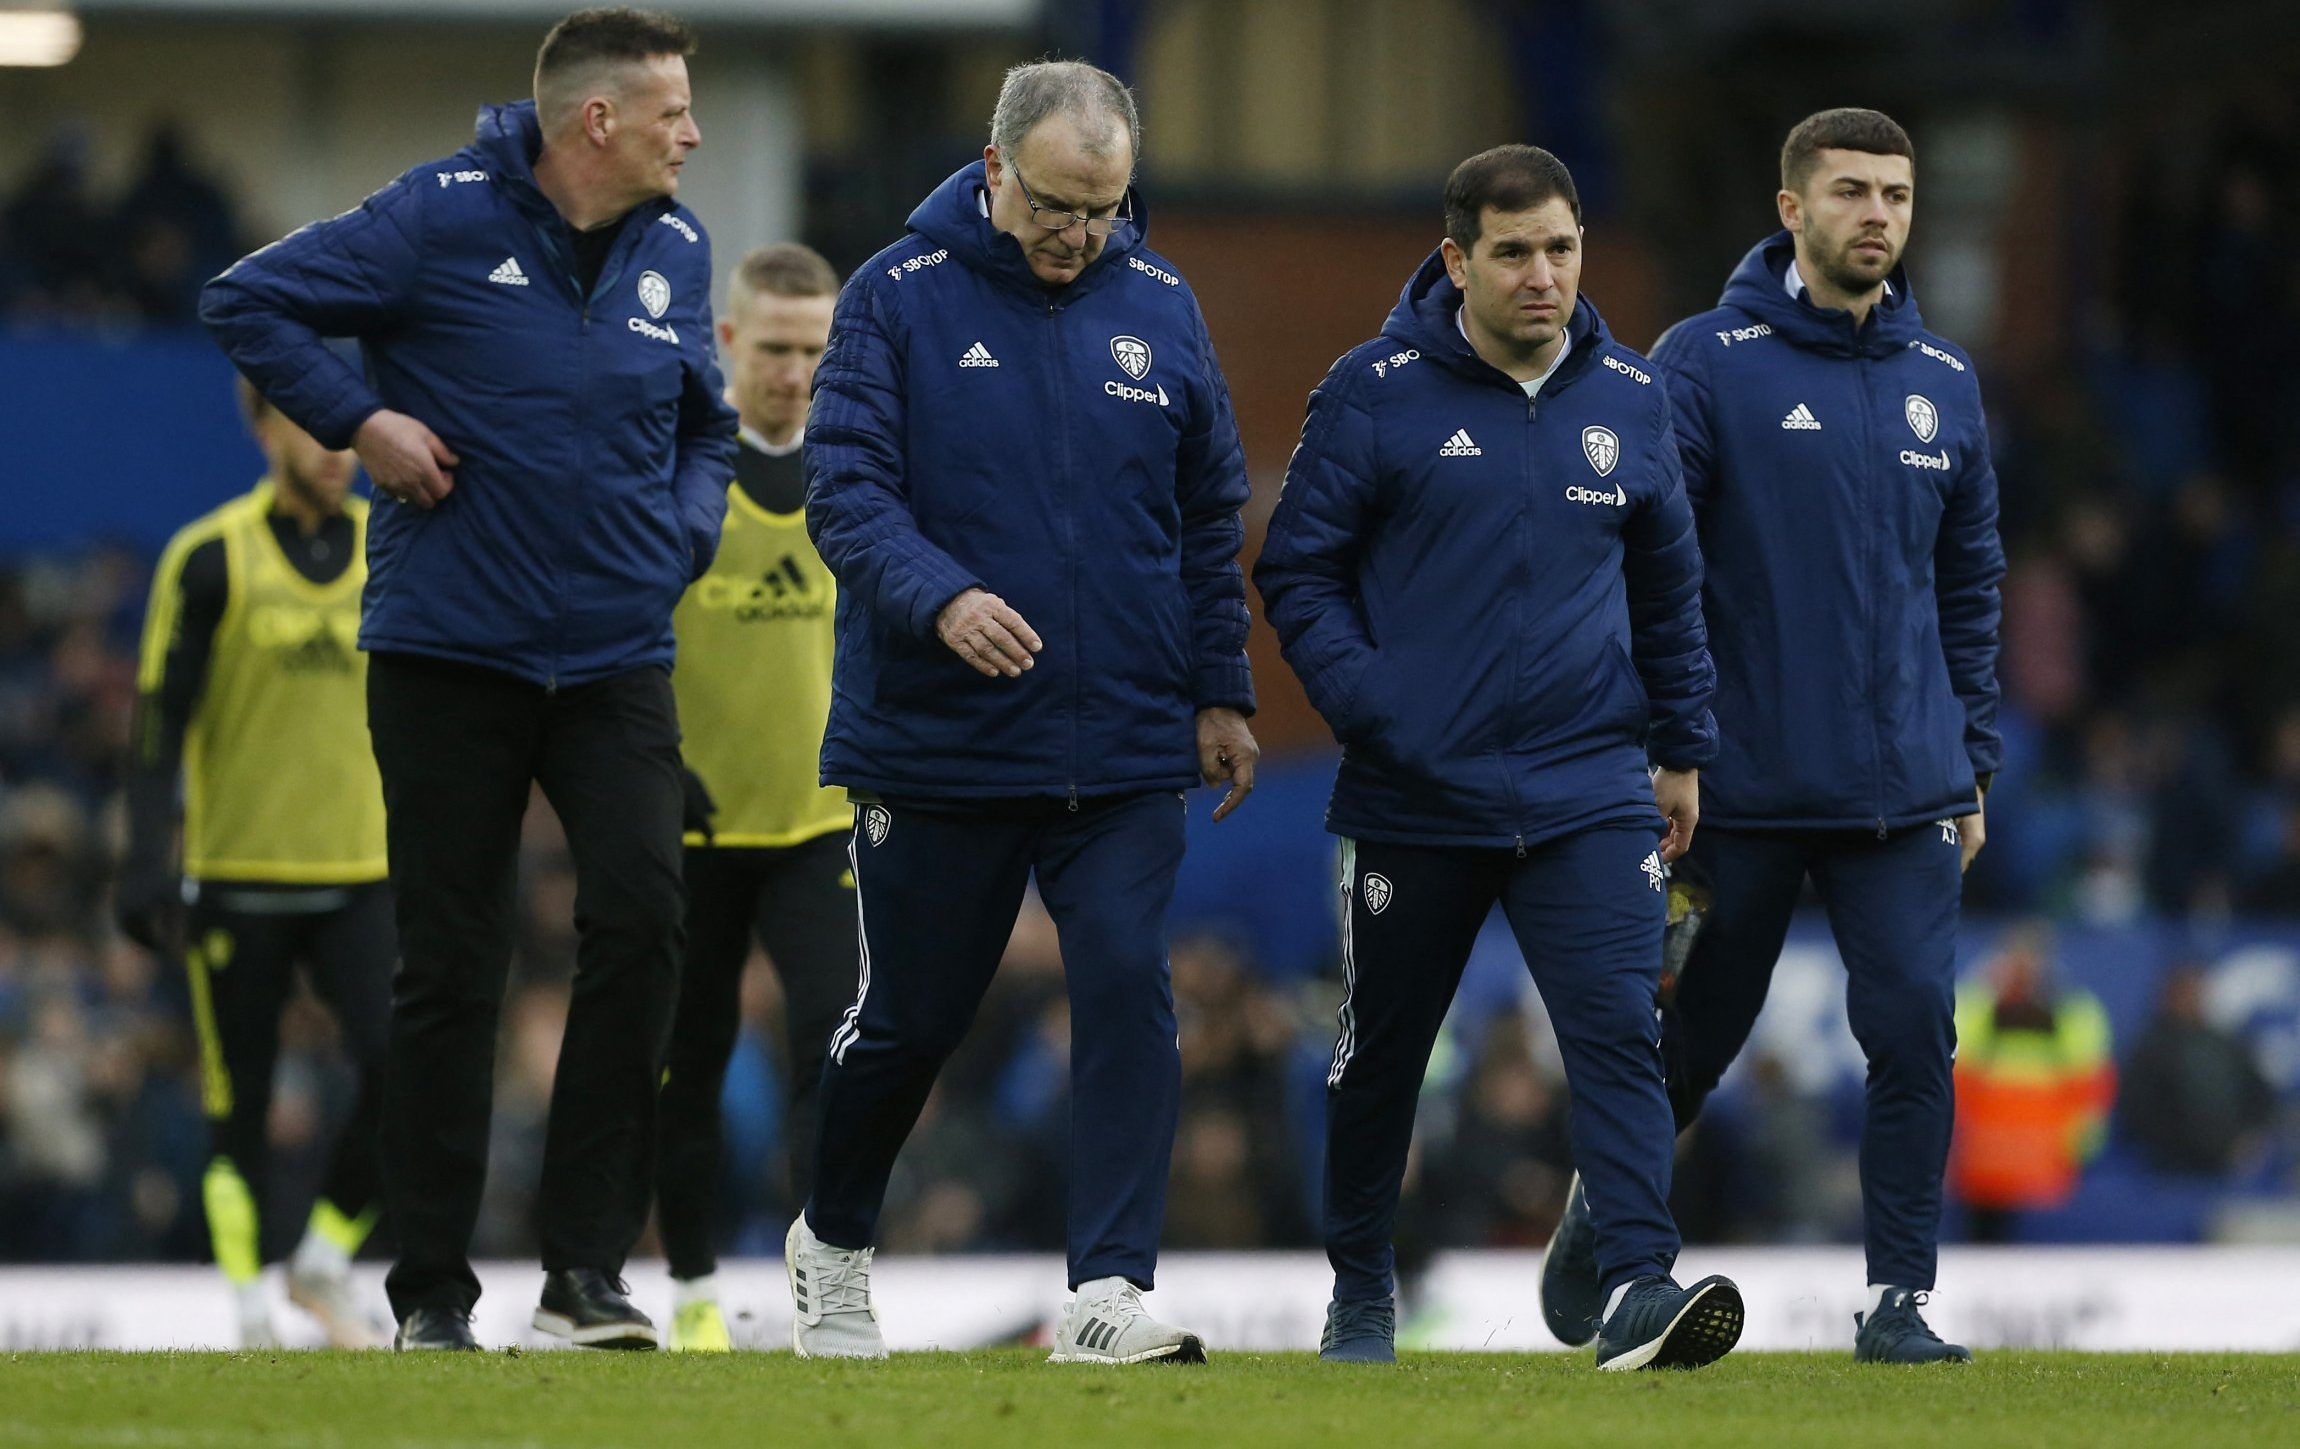 Leeds United boss Marcelo Bielsa and coaching staff walk off after defeat to Everton